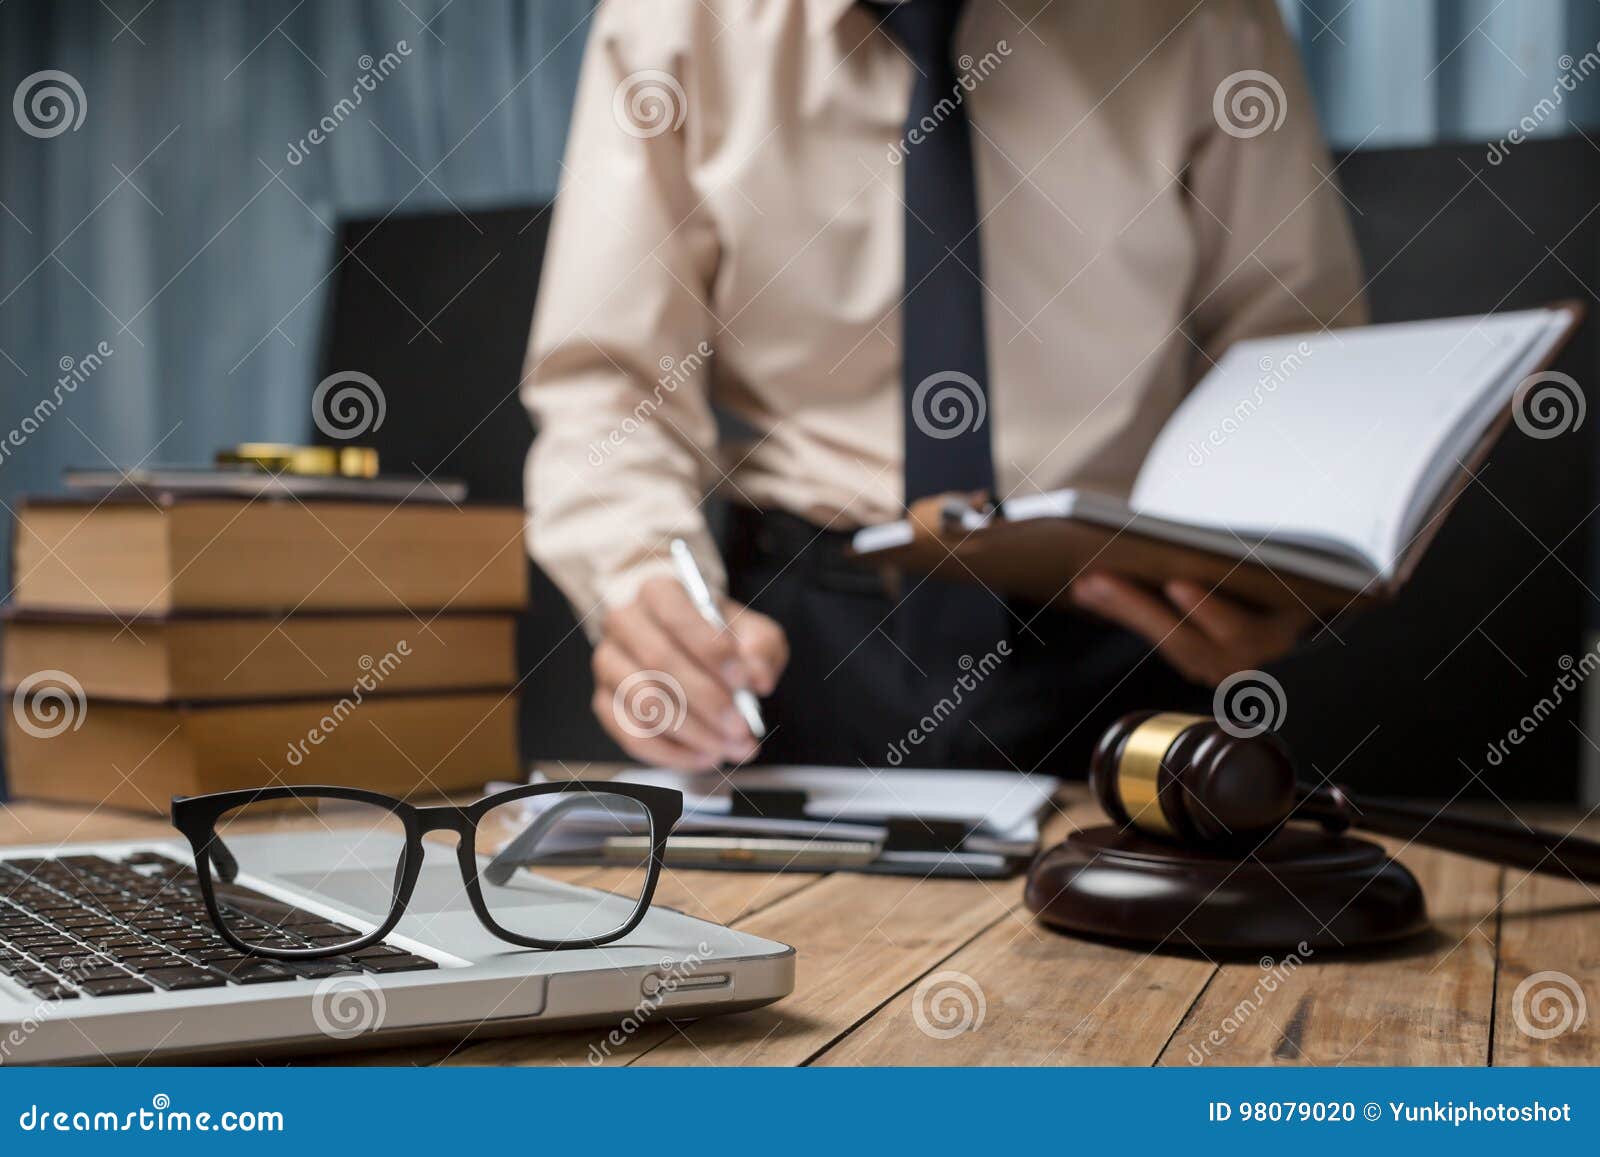 business lawyer working hard at office desk workplace with book